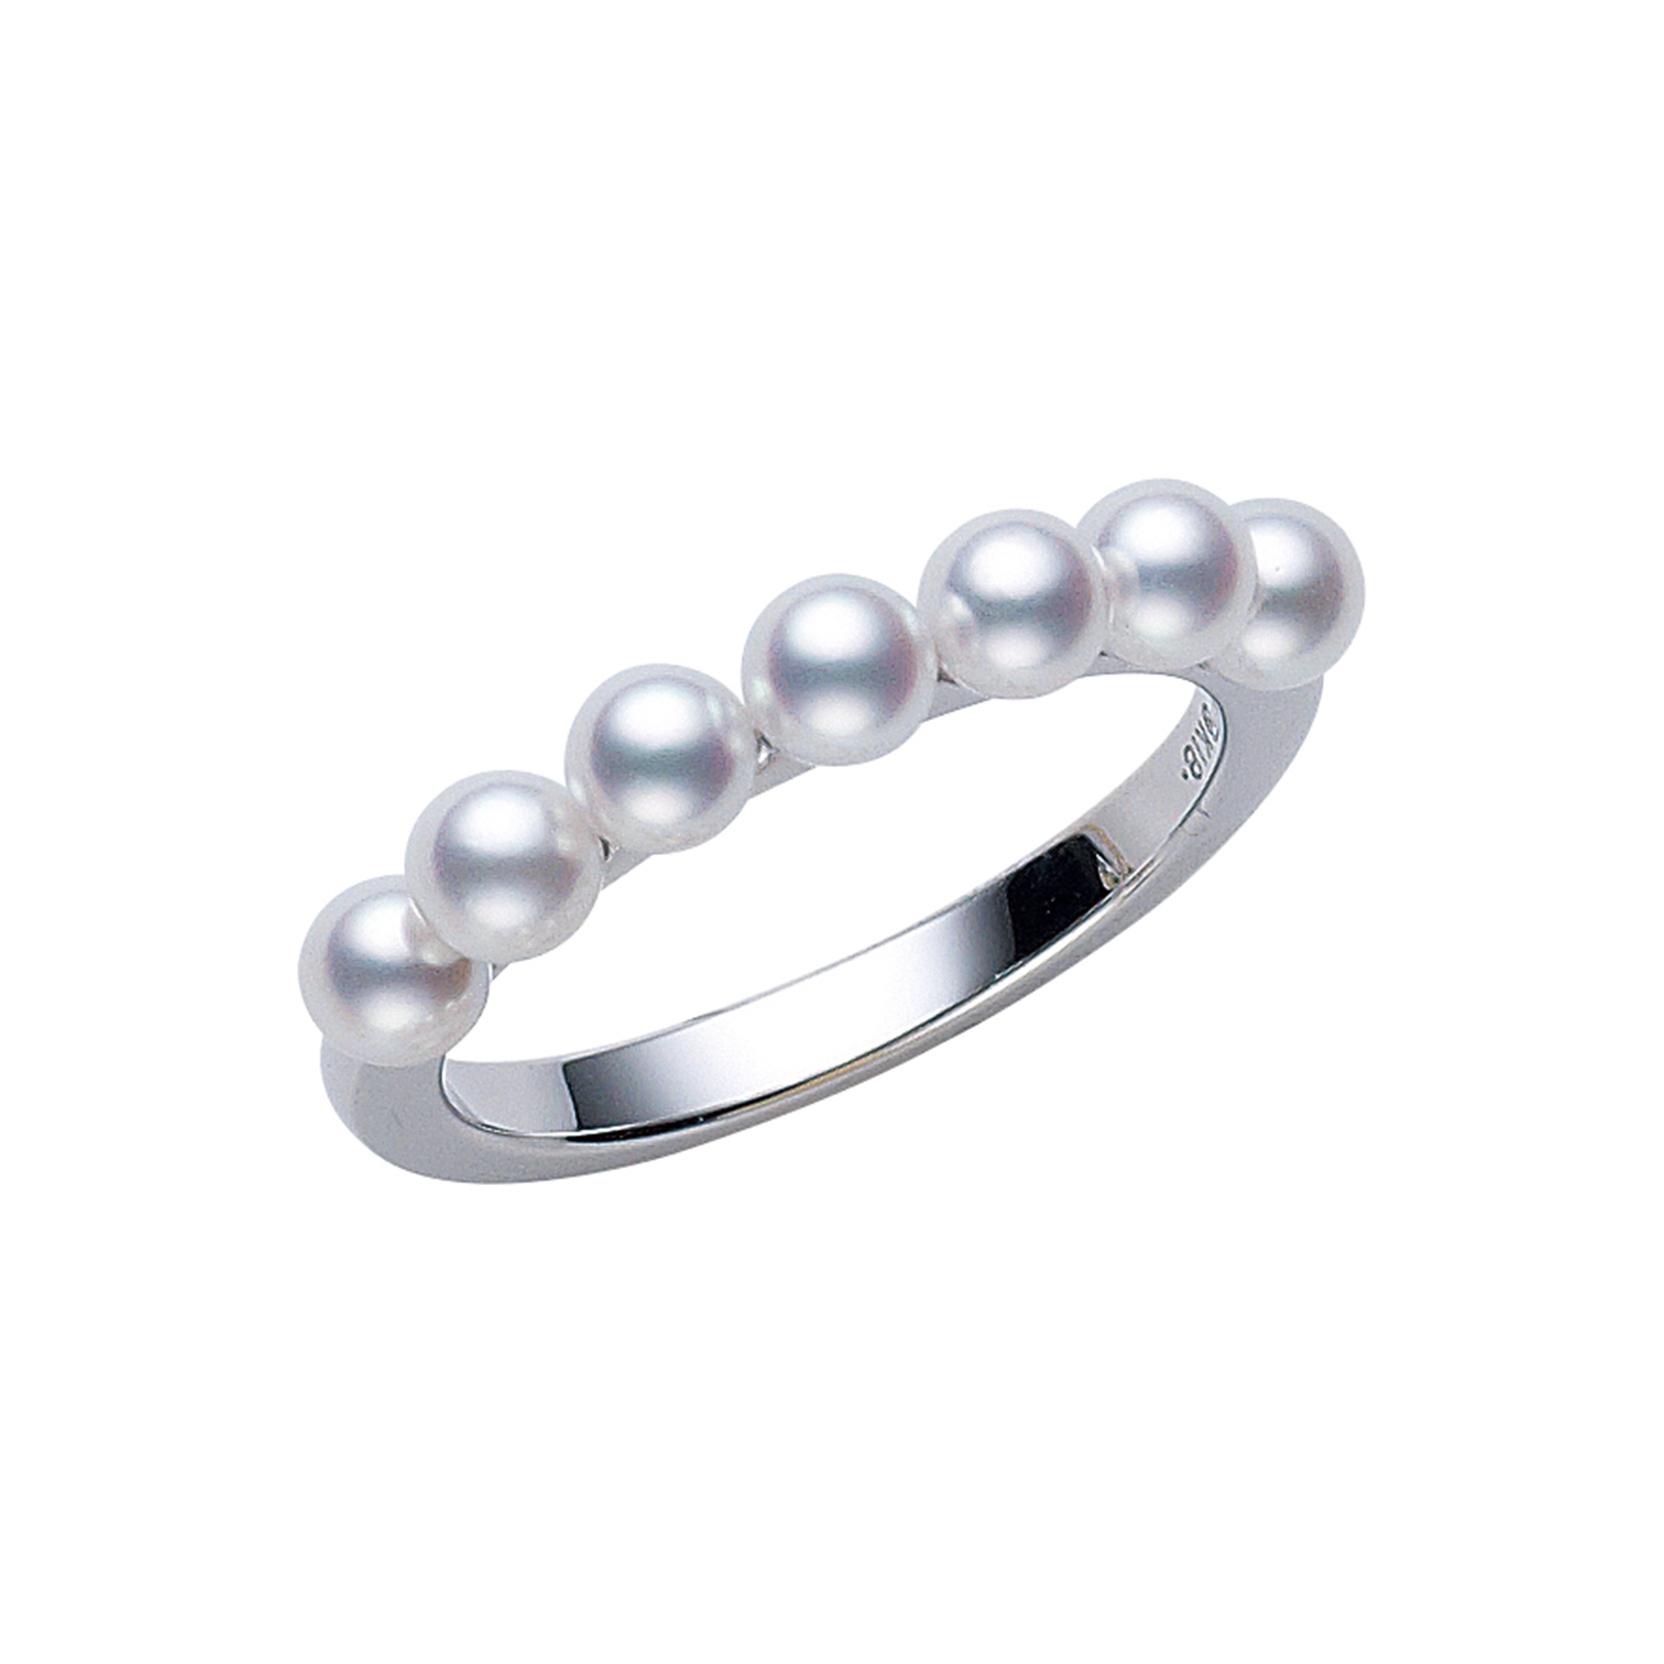 Mikimoto 3.5mm "A+" Pearl Ring